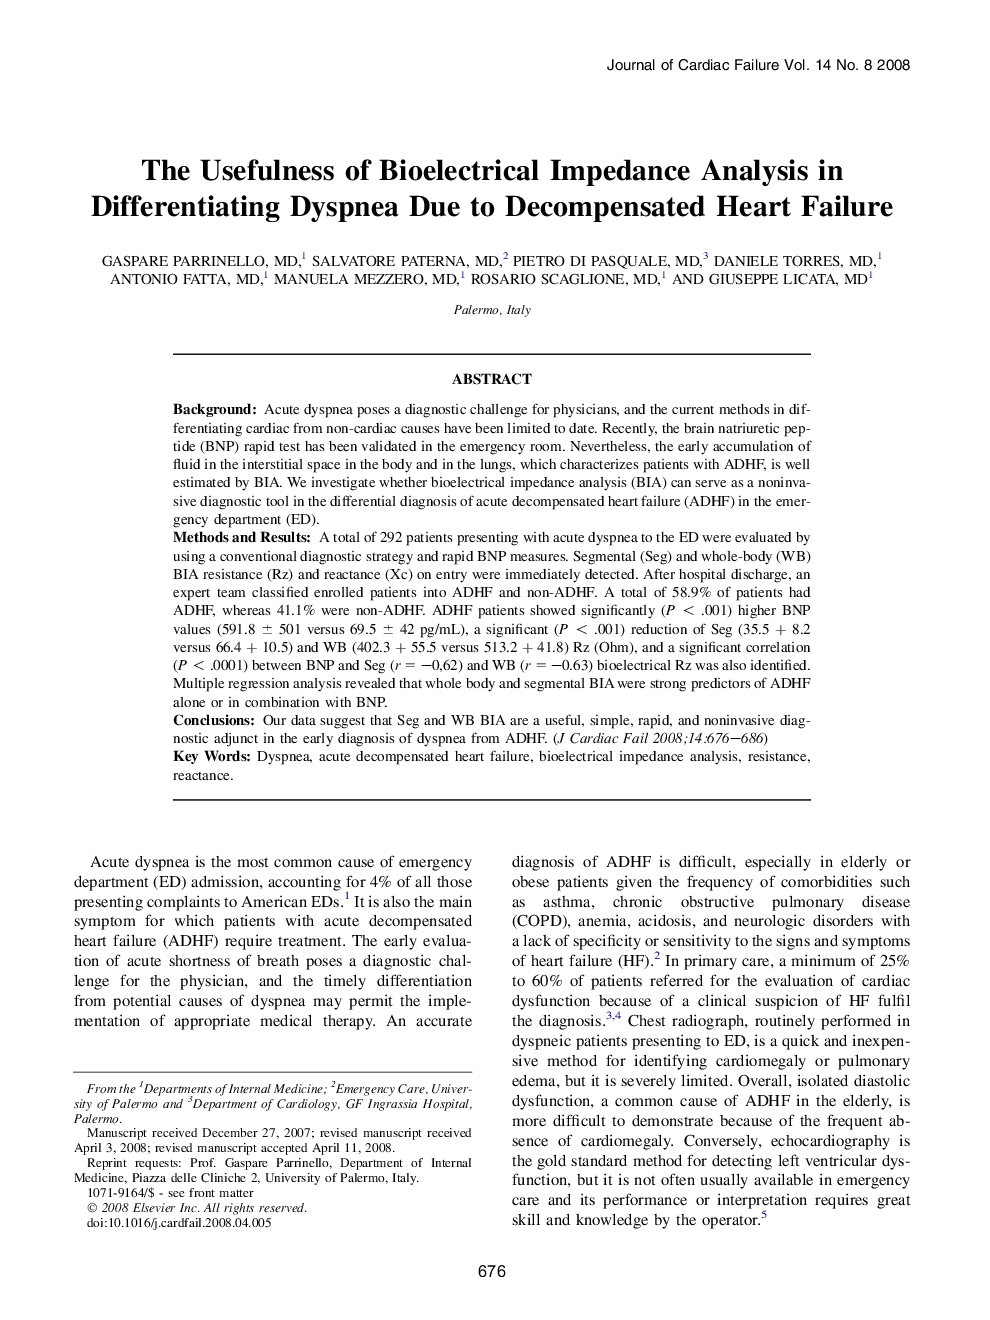 The Usefulness of Bioelectrical Impedance Analysis in Differentiating Dyspnea Due to Decompensated Heart Failure